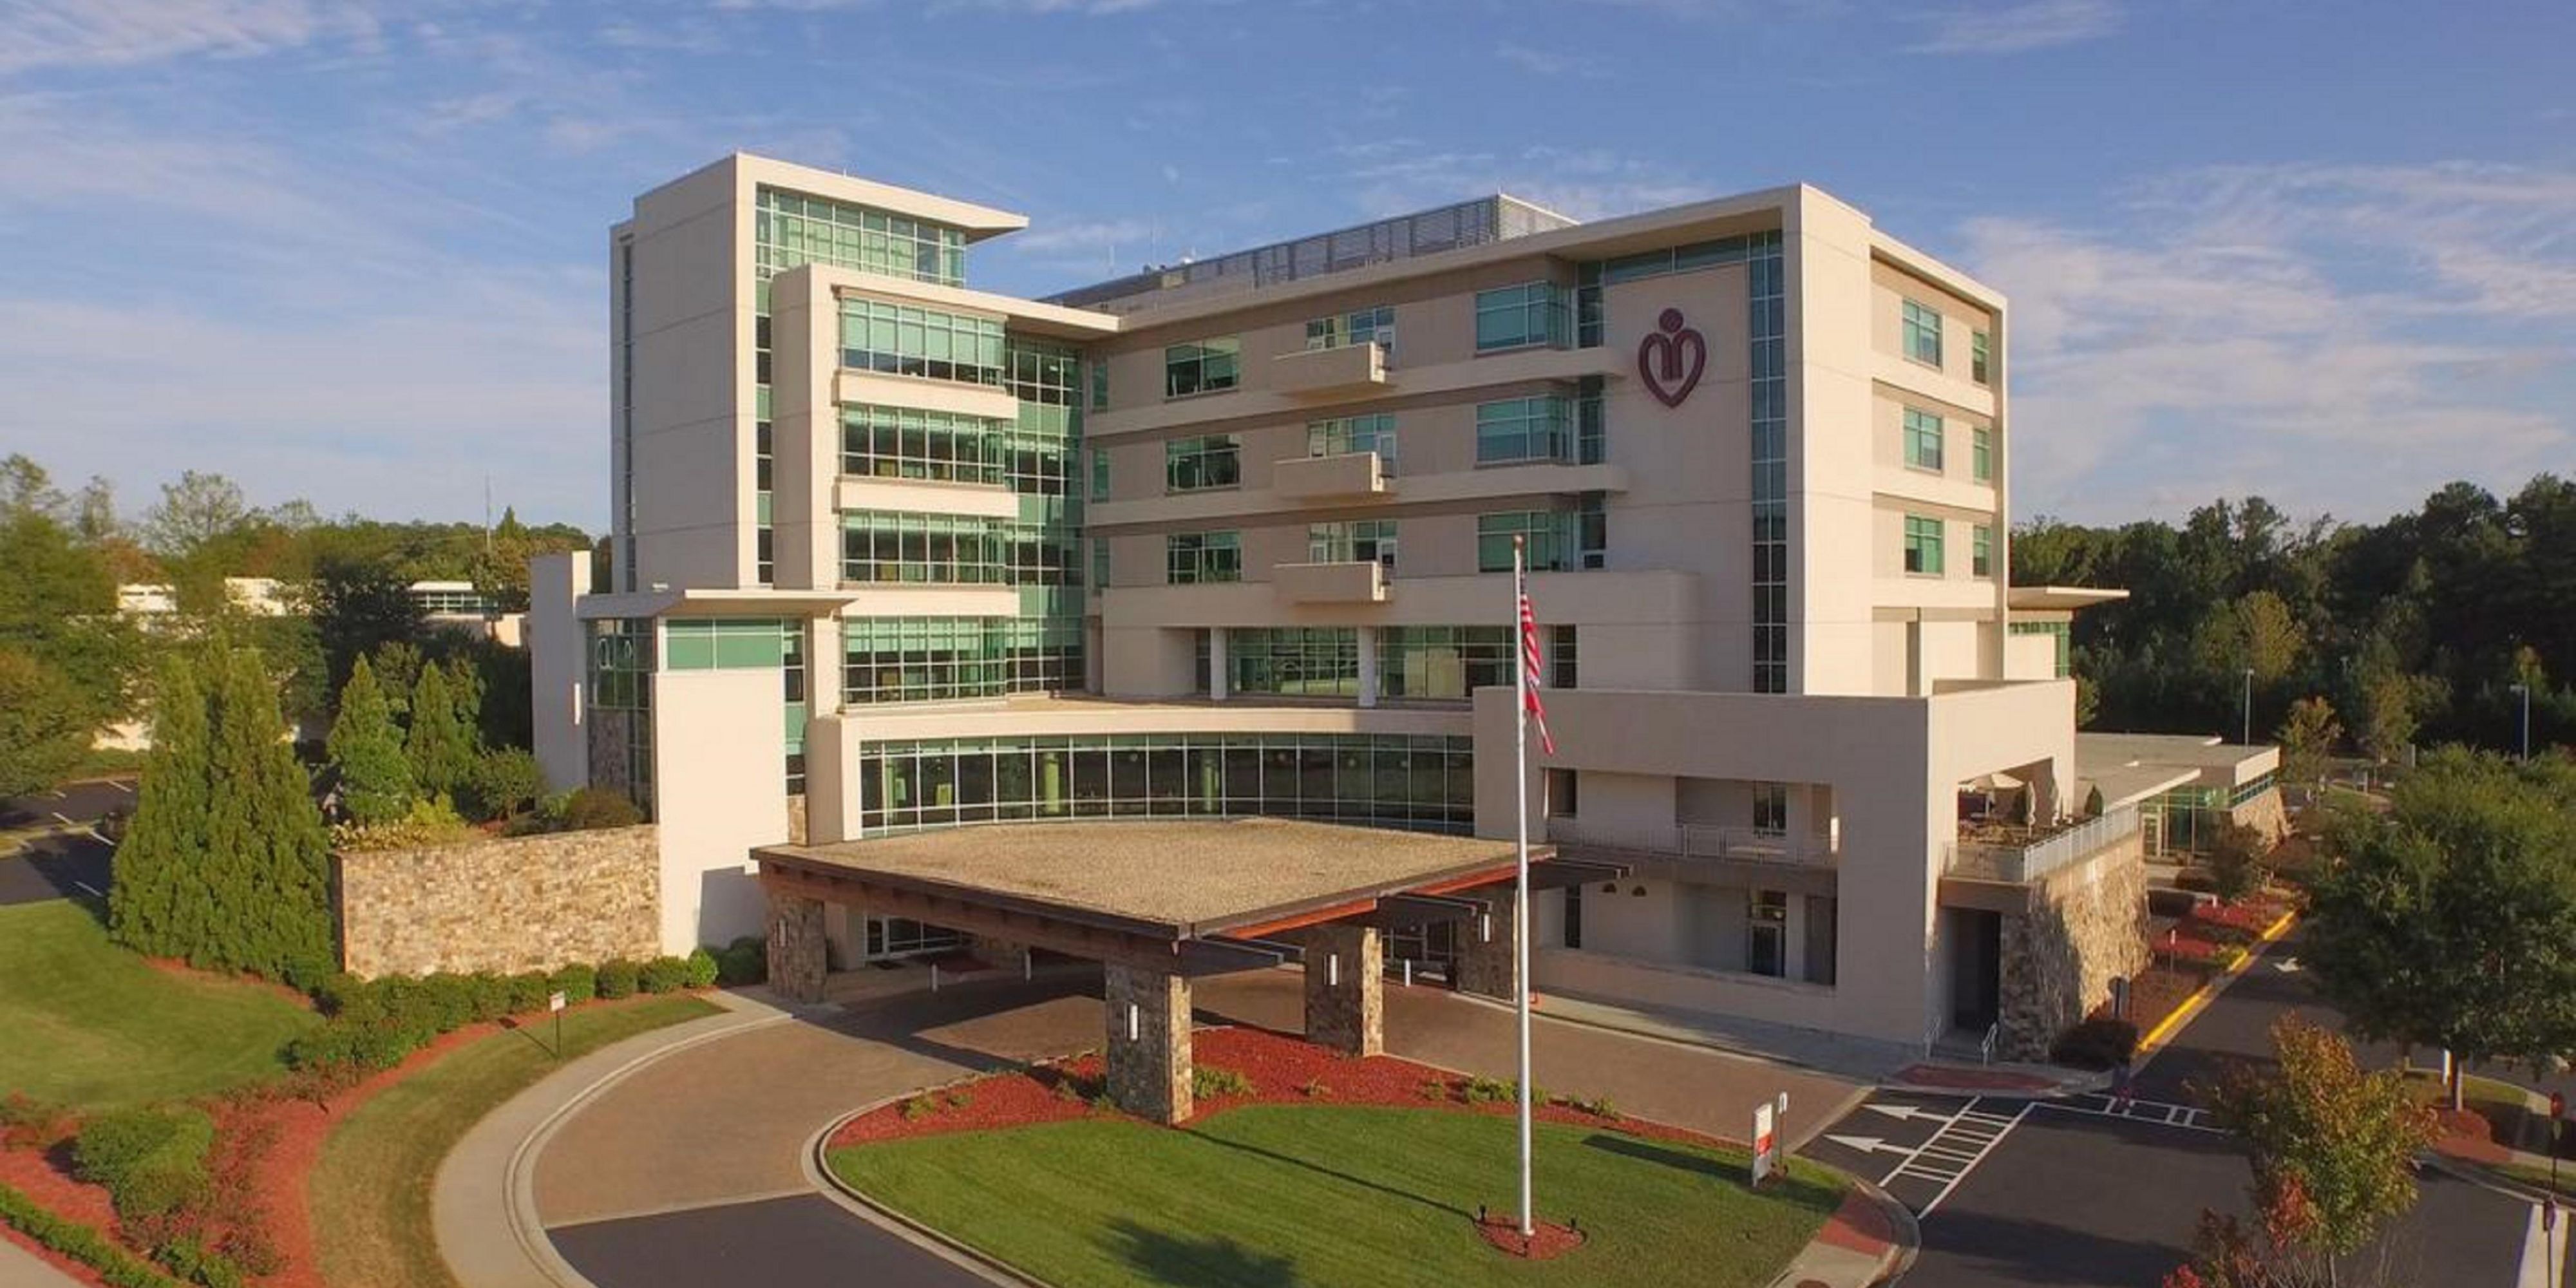 Northside Hospital is a network of hospitals and medical facilities in the Atlanta metropolitan area. Its specialties include oncology, gynecology, neurology, orthopedic surgery and gastroenterology. Less than 5 miles from the hotel. 